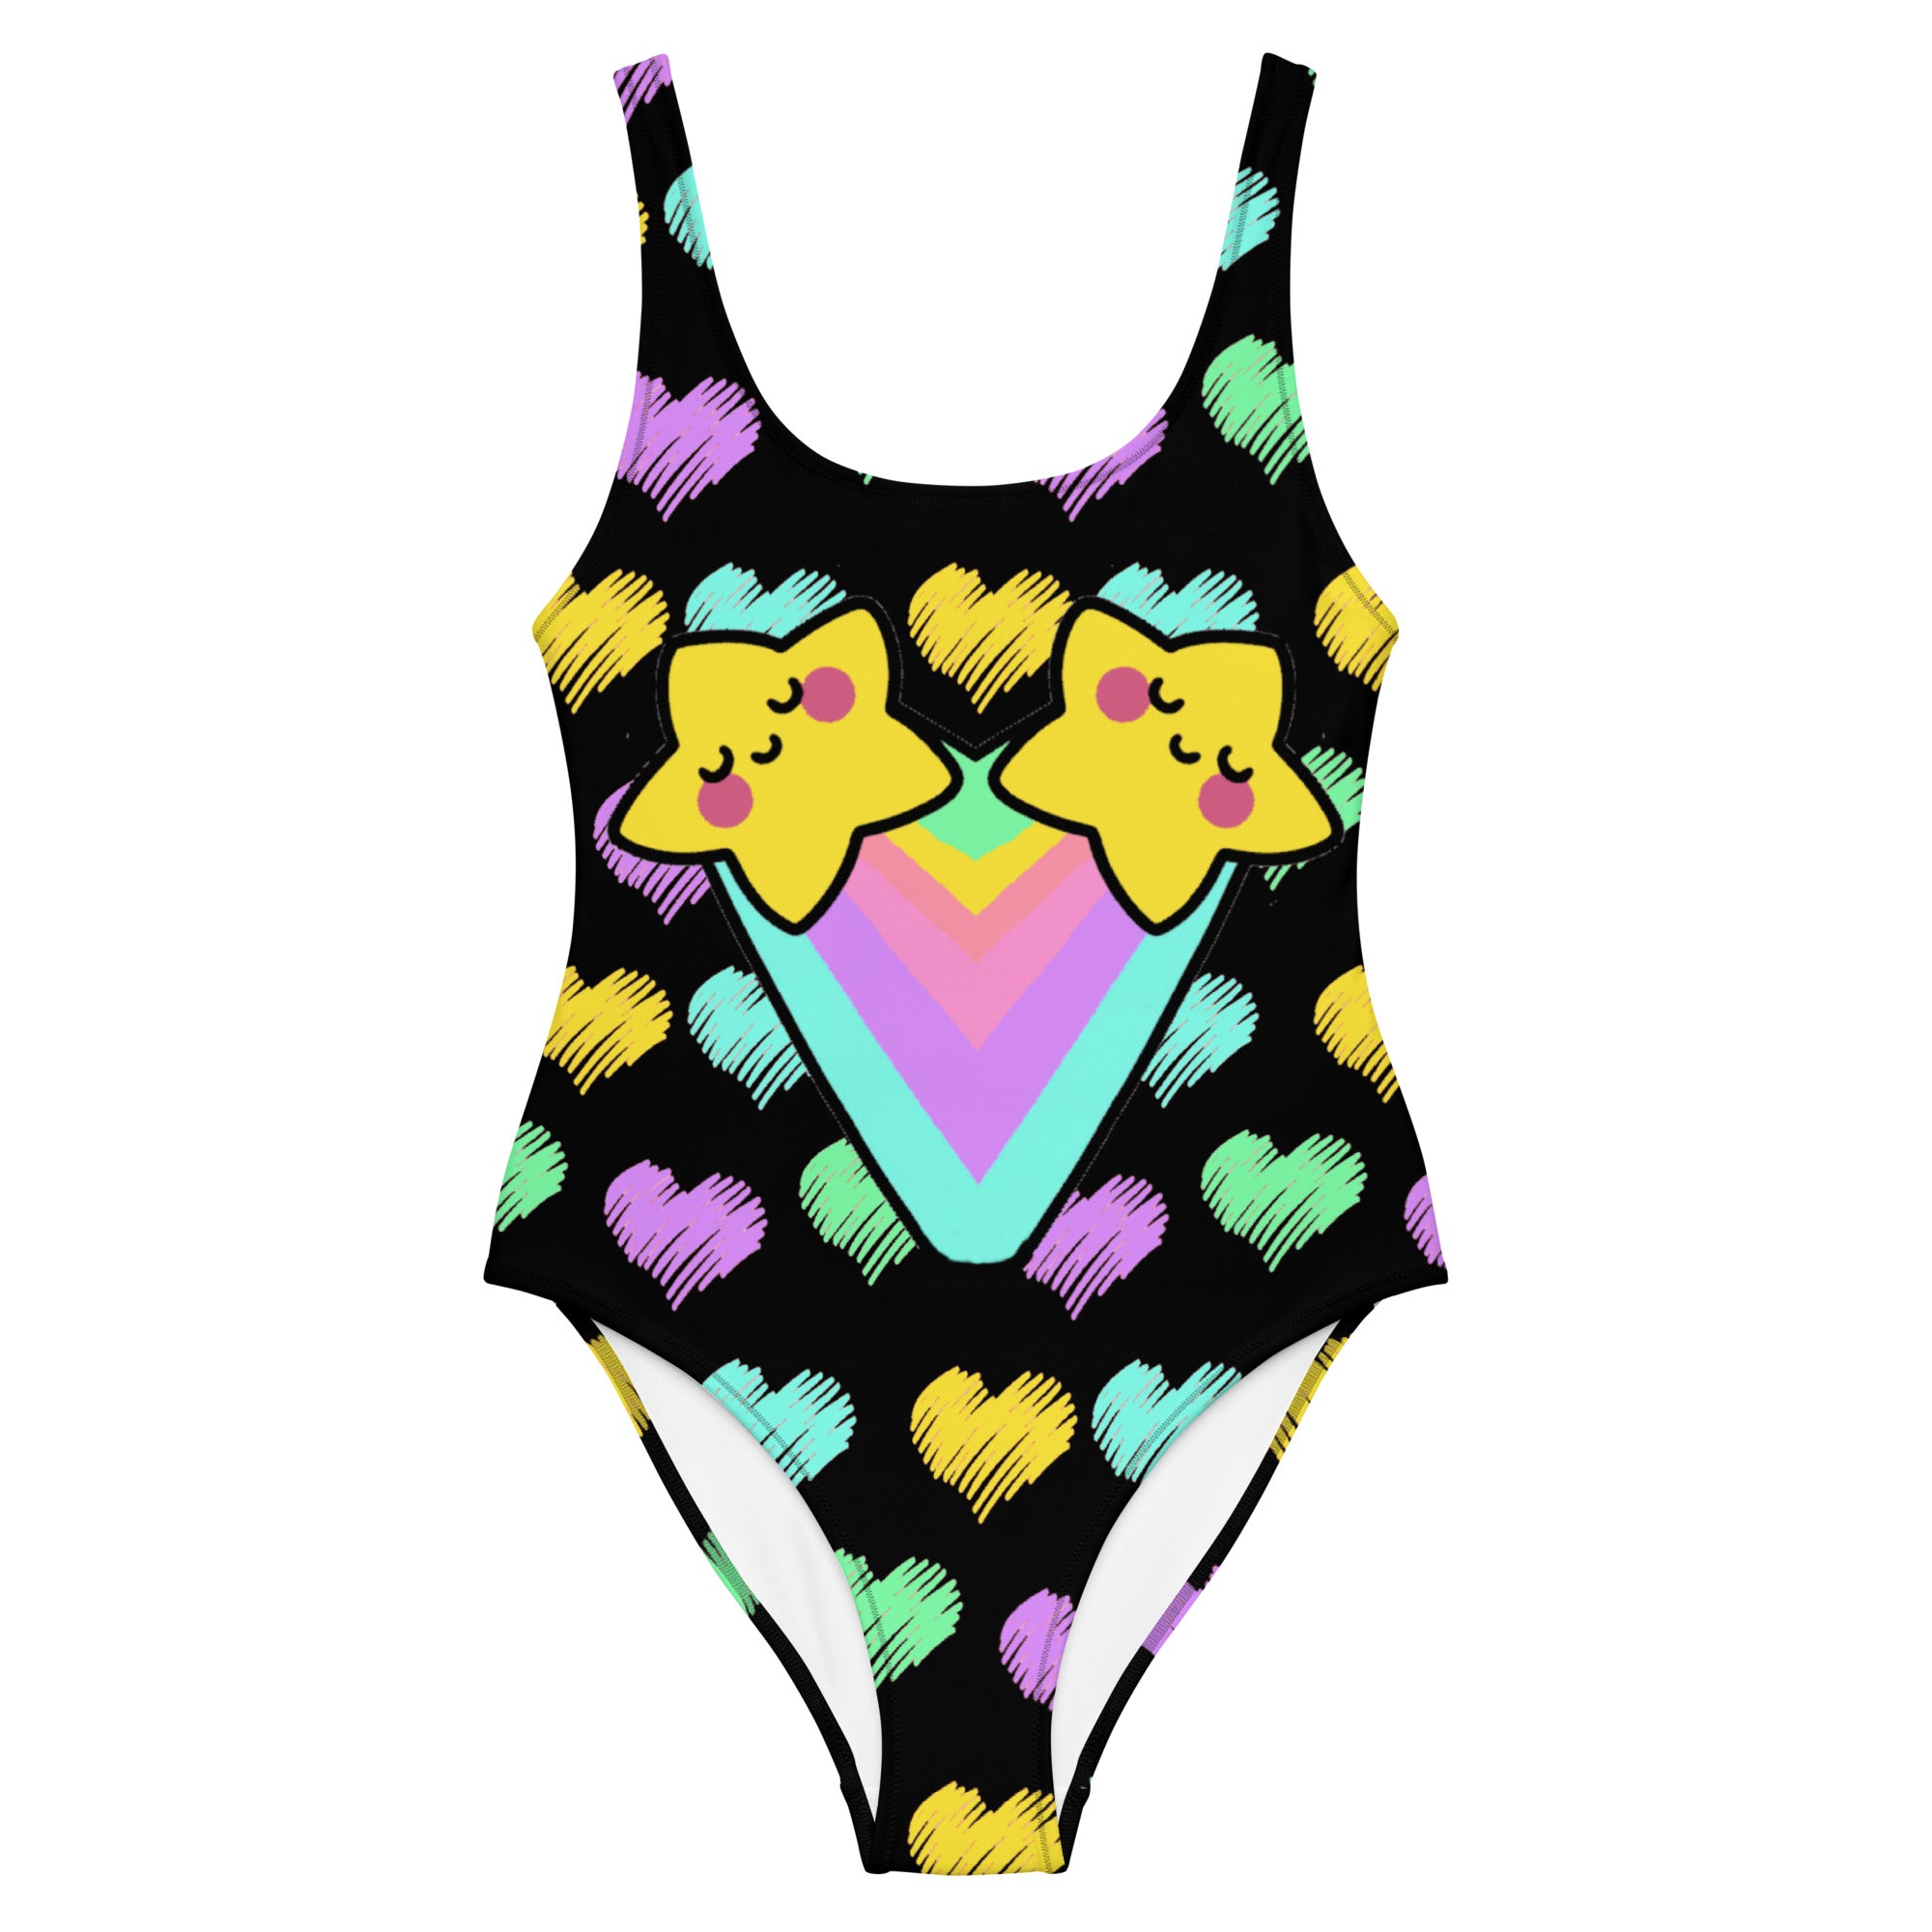 bright and fun pastel star and heart design, making it an eye-catching choice for a rave or festival. The high-quality materials ensure that you look and feel your best.